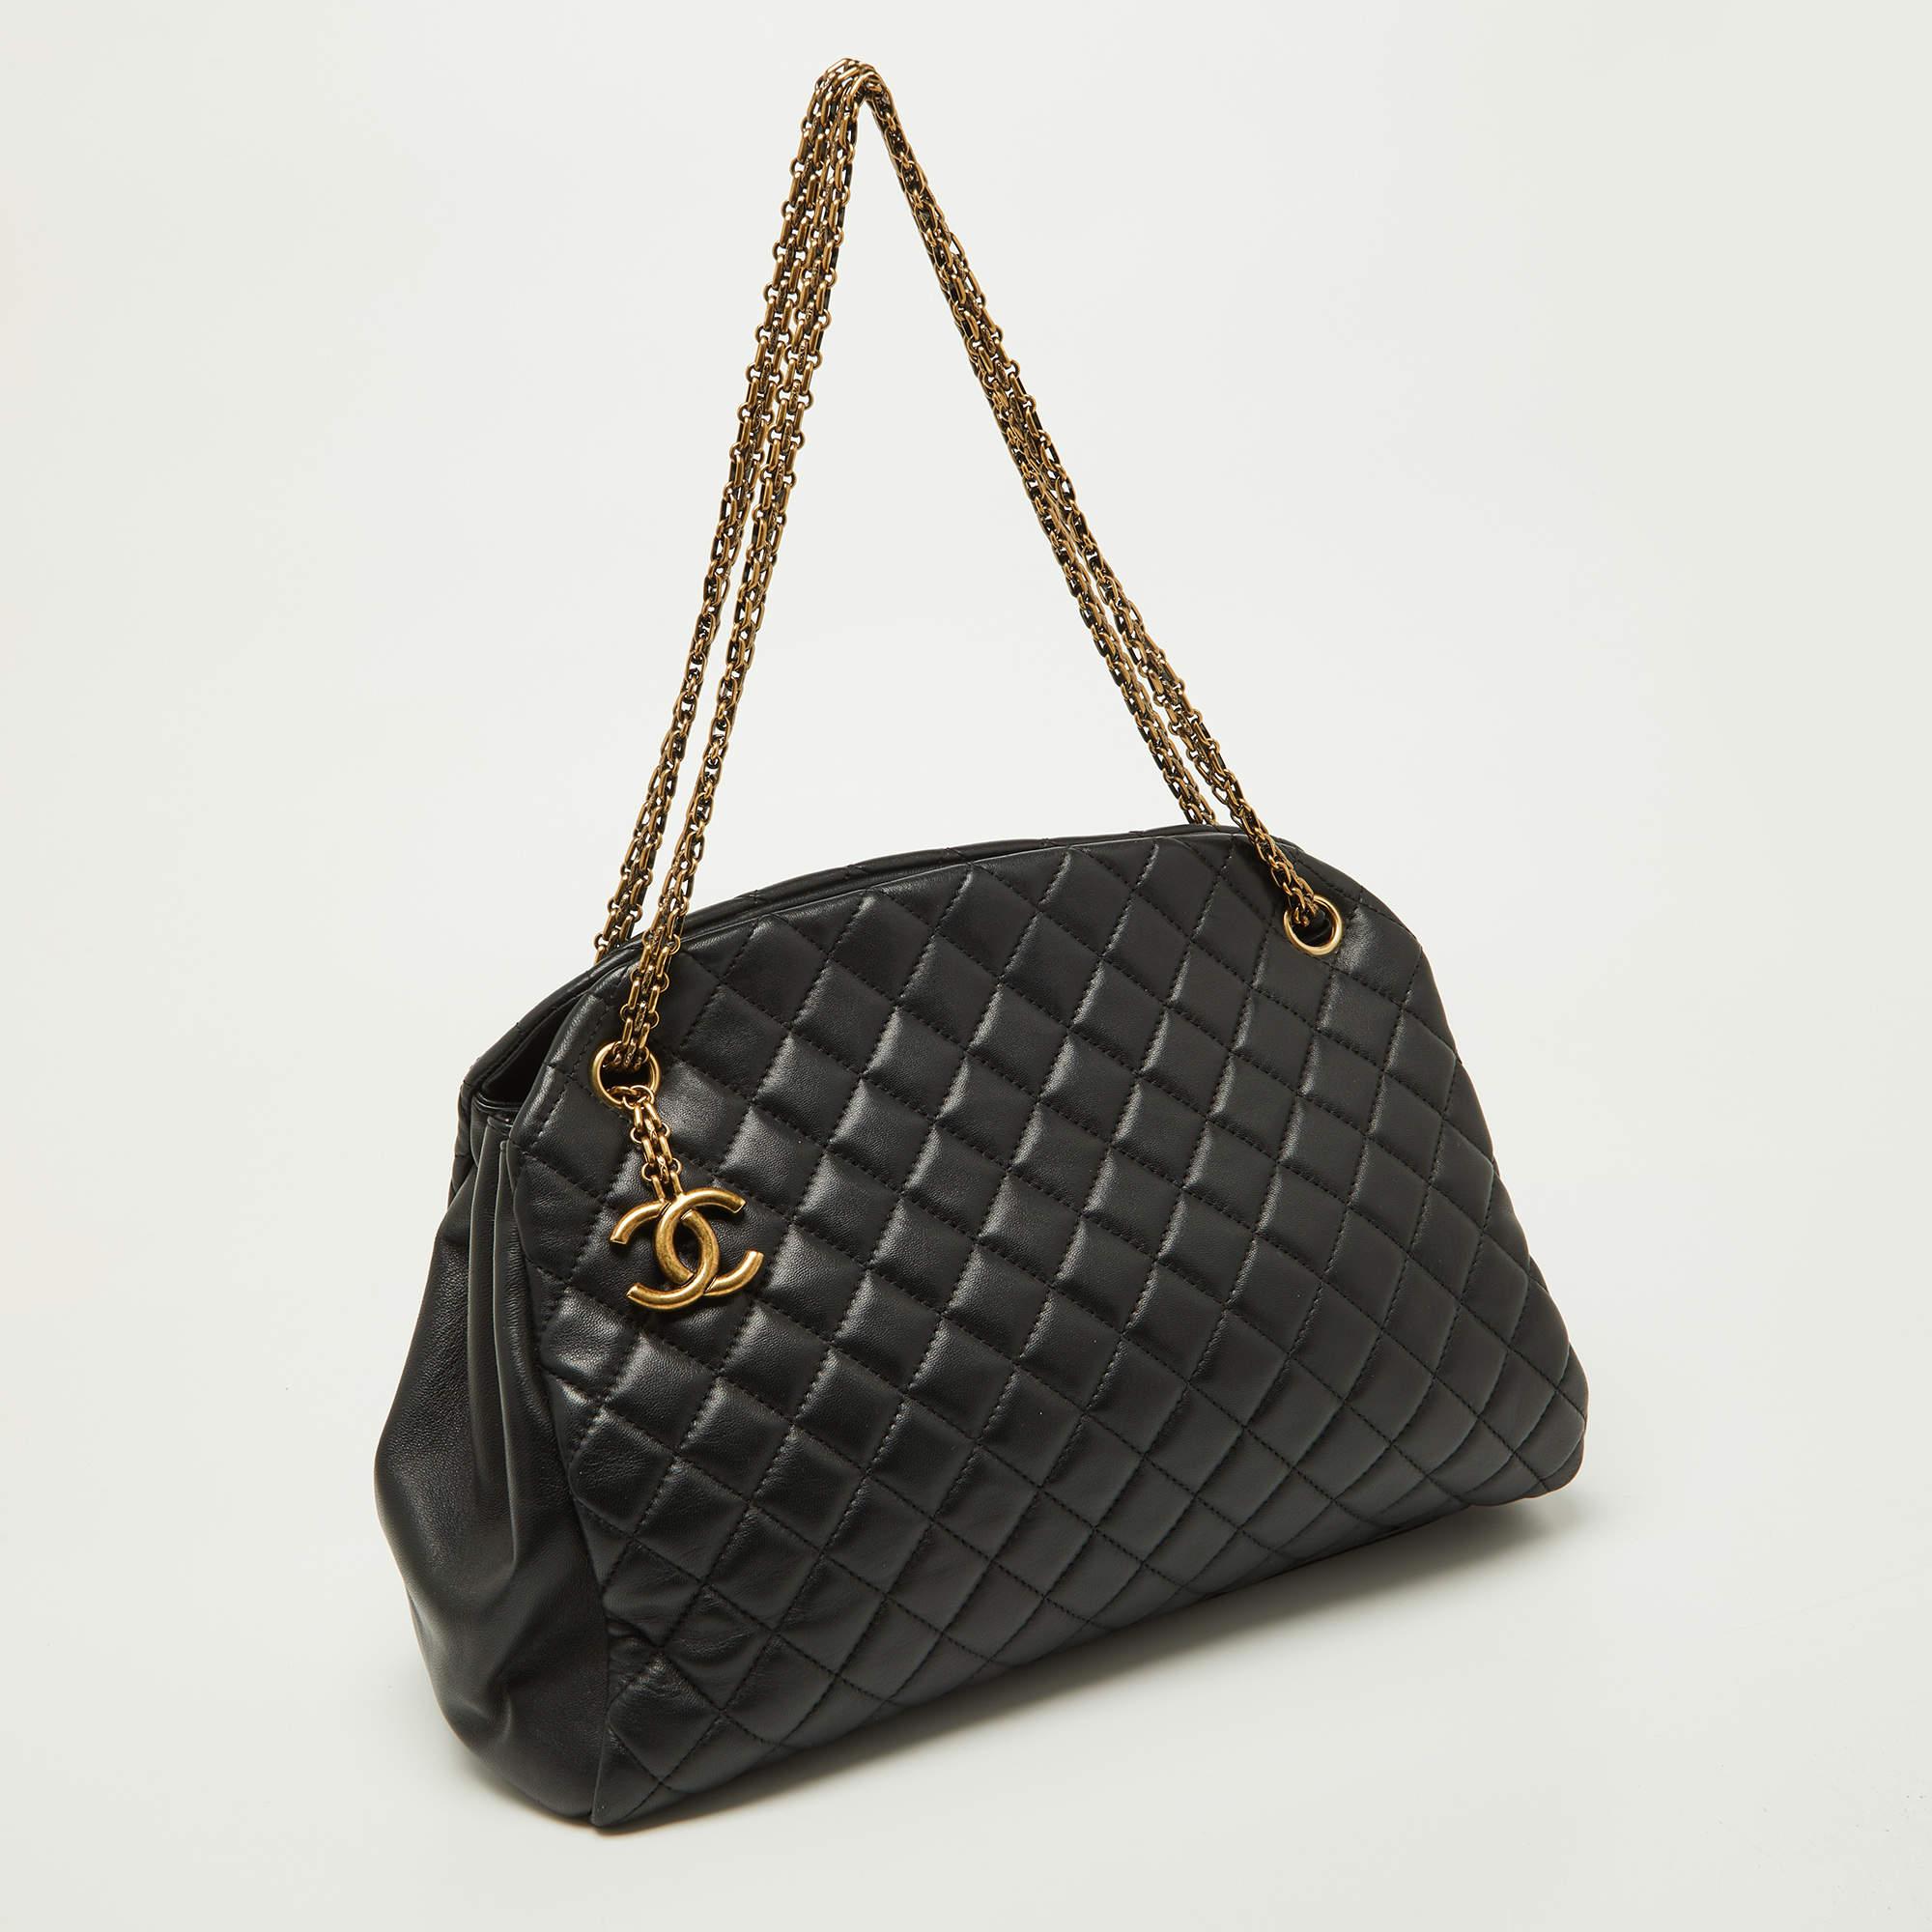 Chanel Black Quilted Leather Just Mademoiselle Bowler Bag In Good Condition For Sale In Dubai, Al Qouz 2